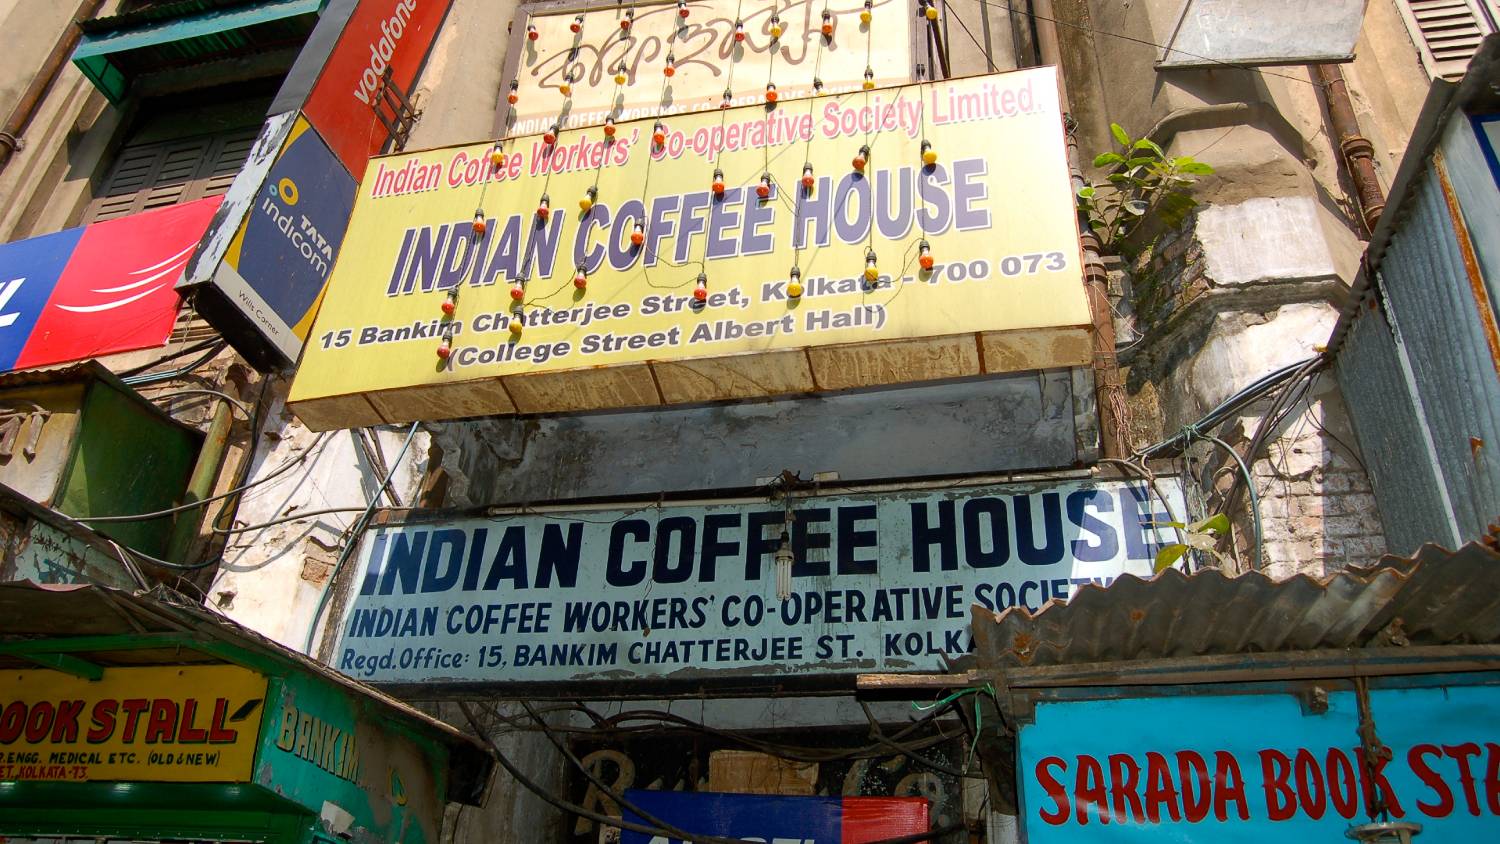 The Indian Coffee House is run by Indian worker’s cooperatives and is open to all (Wikipedia)